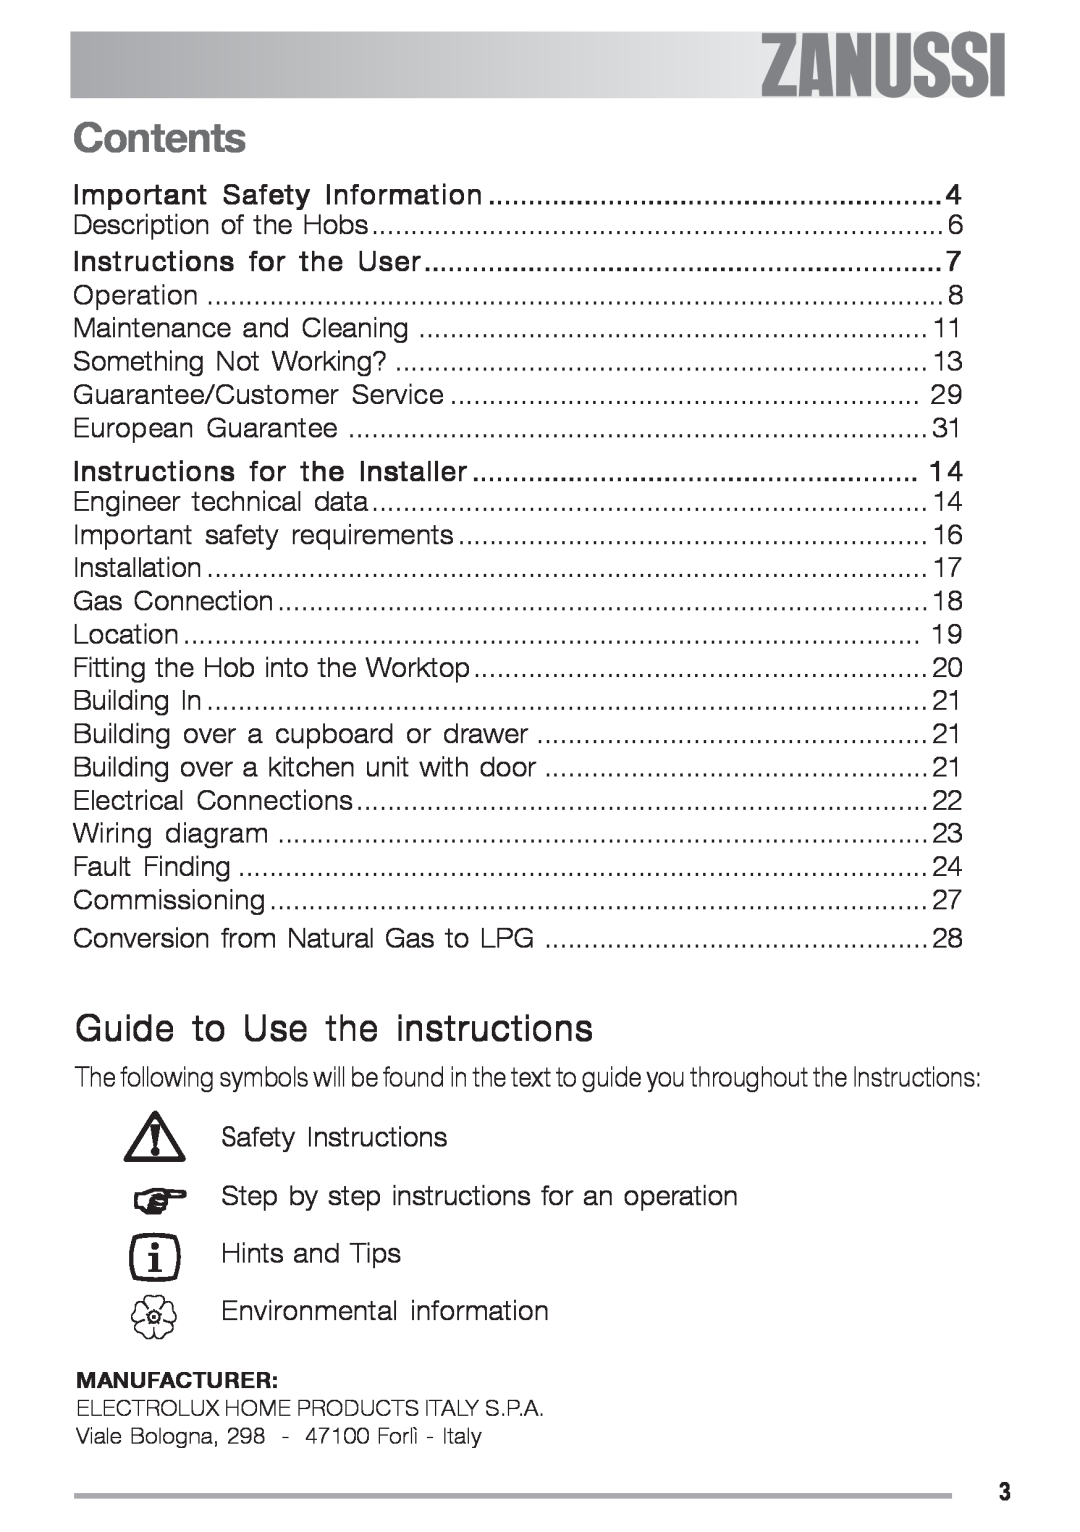 Zanussi ZGS 682 ICT manual Contents, Guide to Use the instructions 